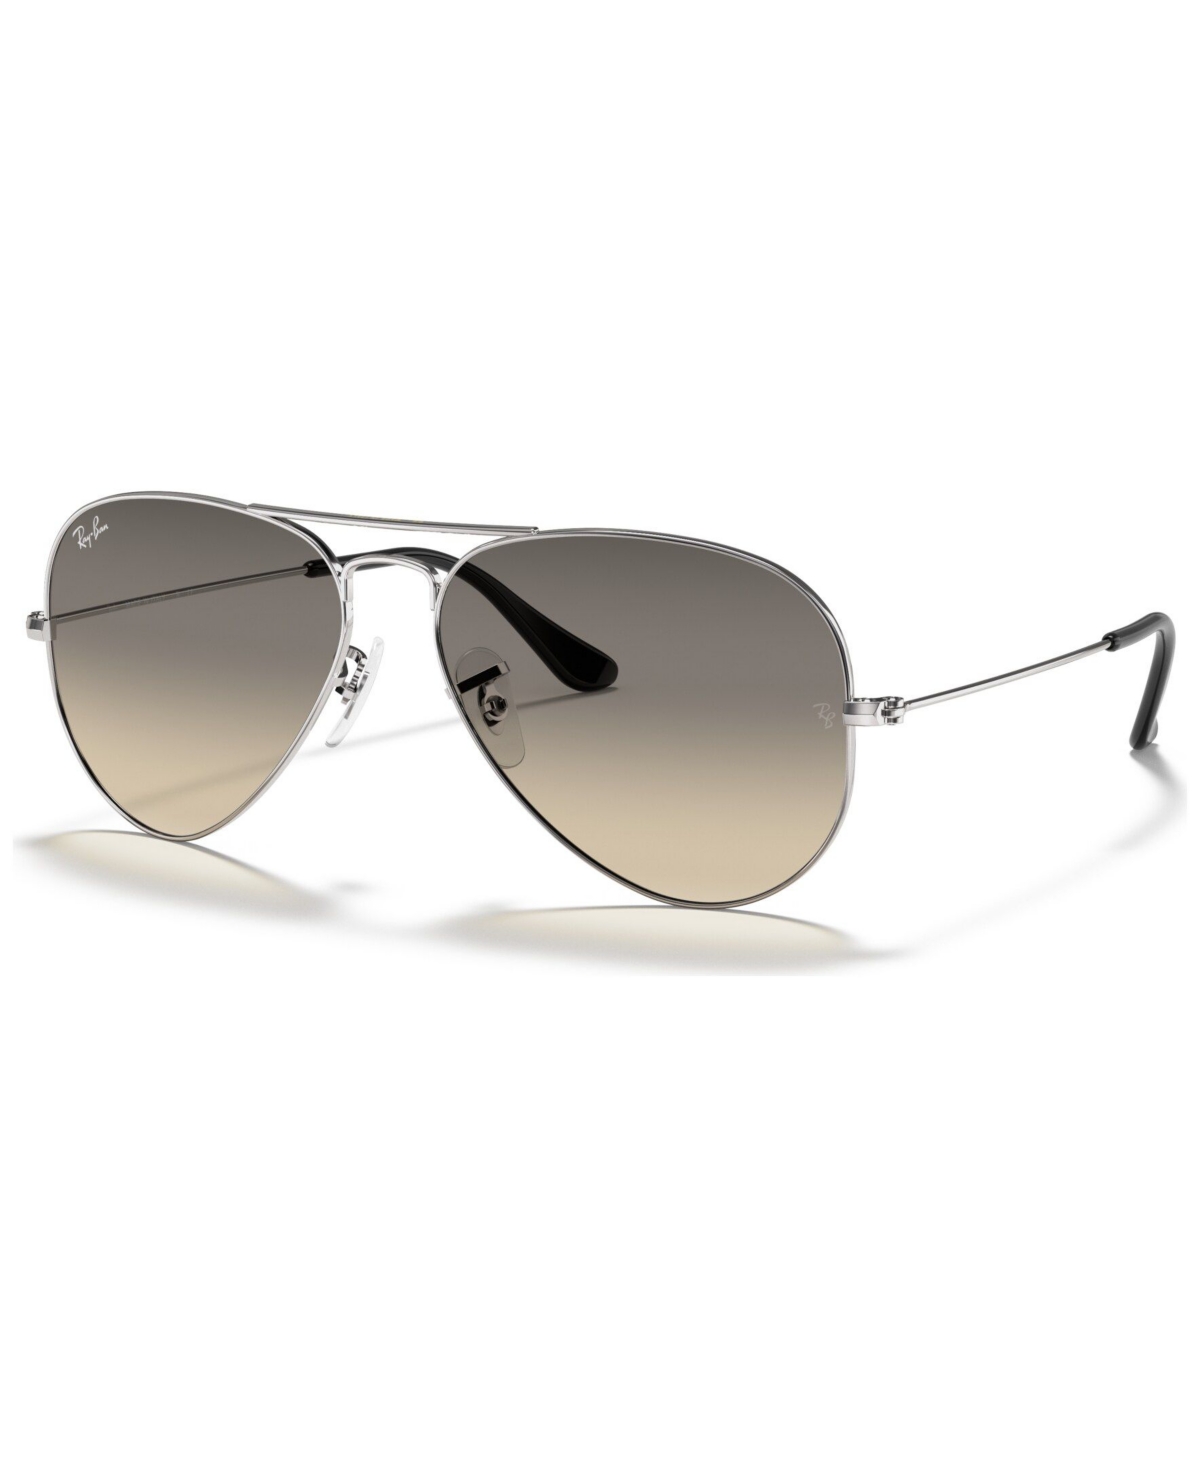 Ray Ban Unisex Sunglasses, Rb3025 Aviator Gradient In Silver,grey Gradient